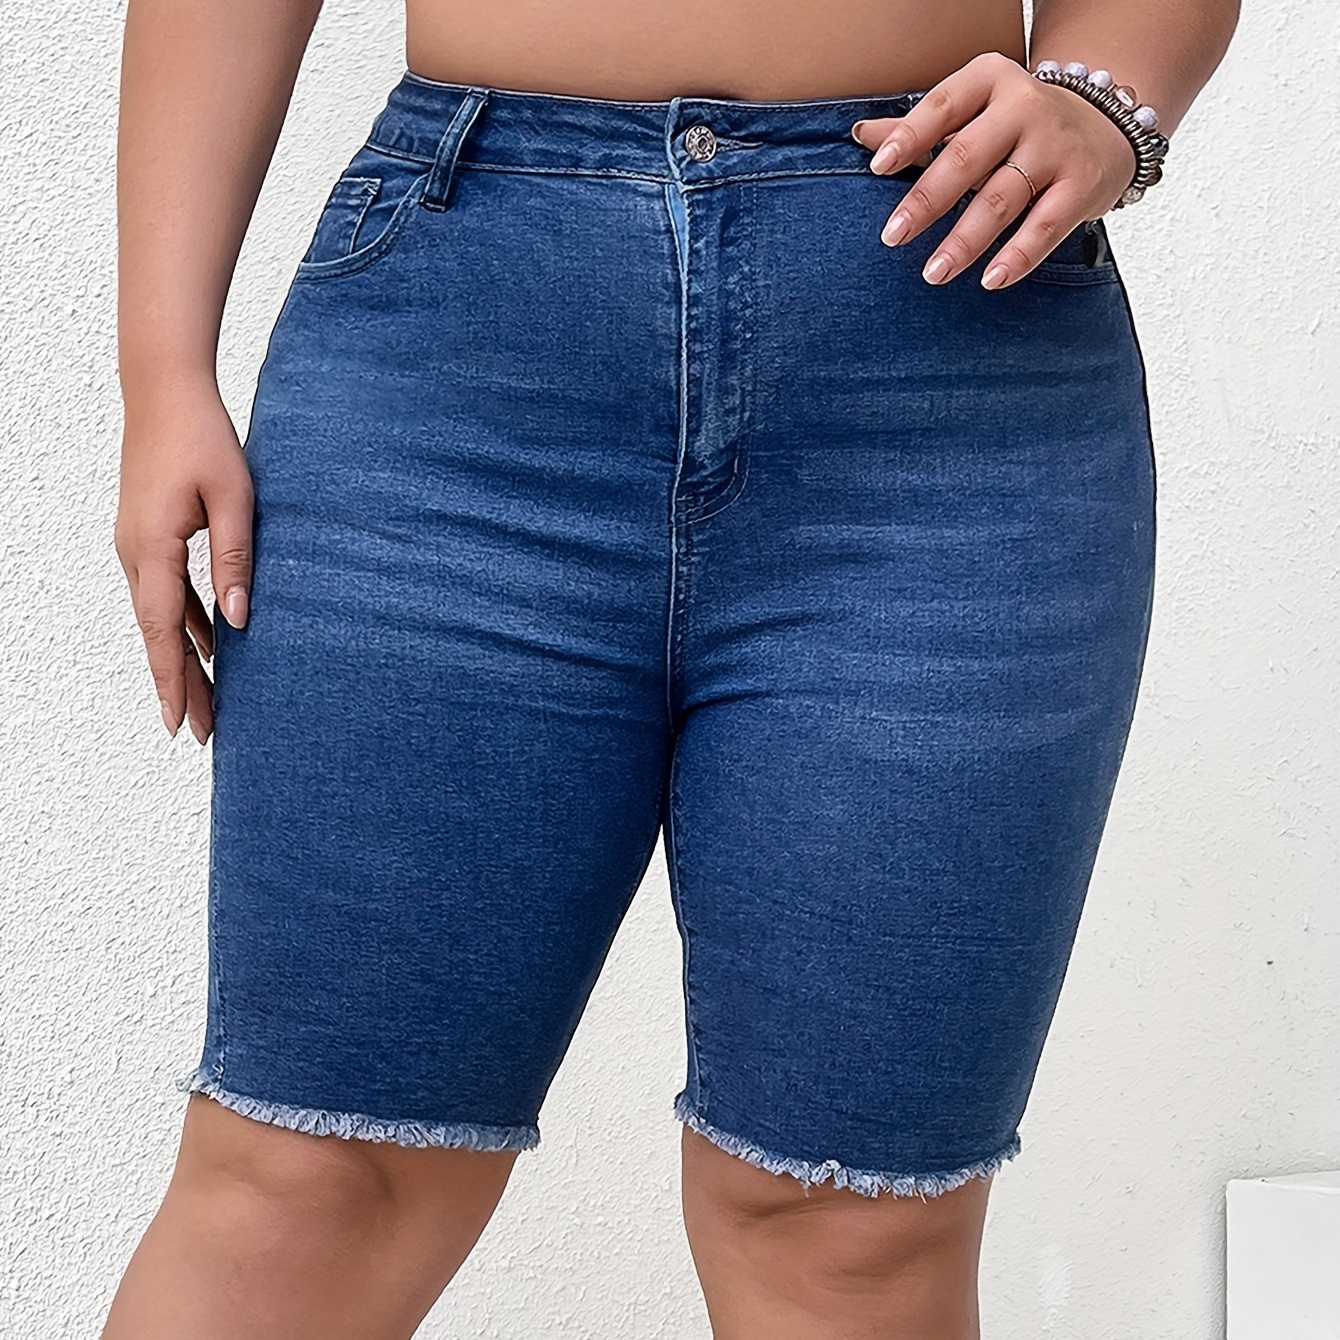 

Plus Size Blue Slim-fit Bermuda Denim Shorts, Sexy Style, Frayed Hem, Casual Summer Fashion, Stretch Waistband, Comfort Fit Jeans For Women